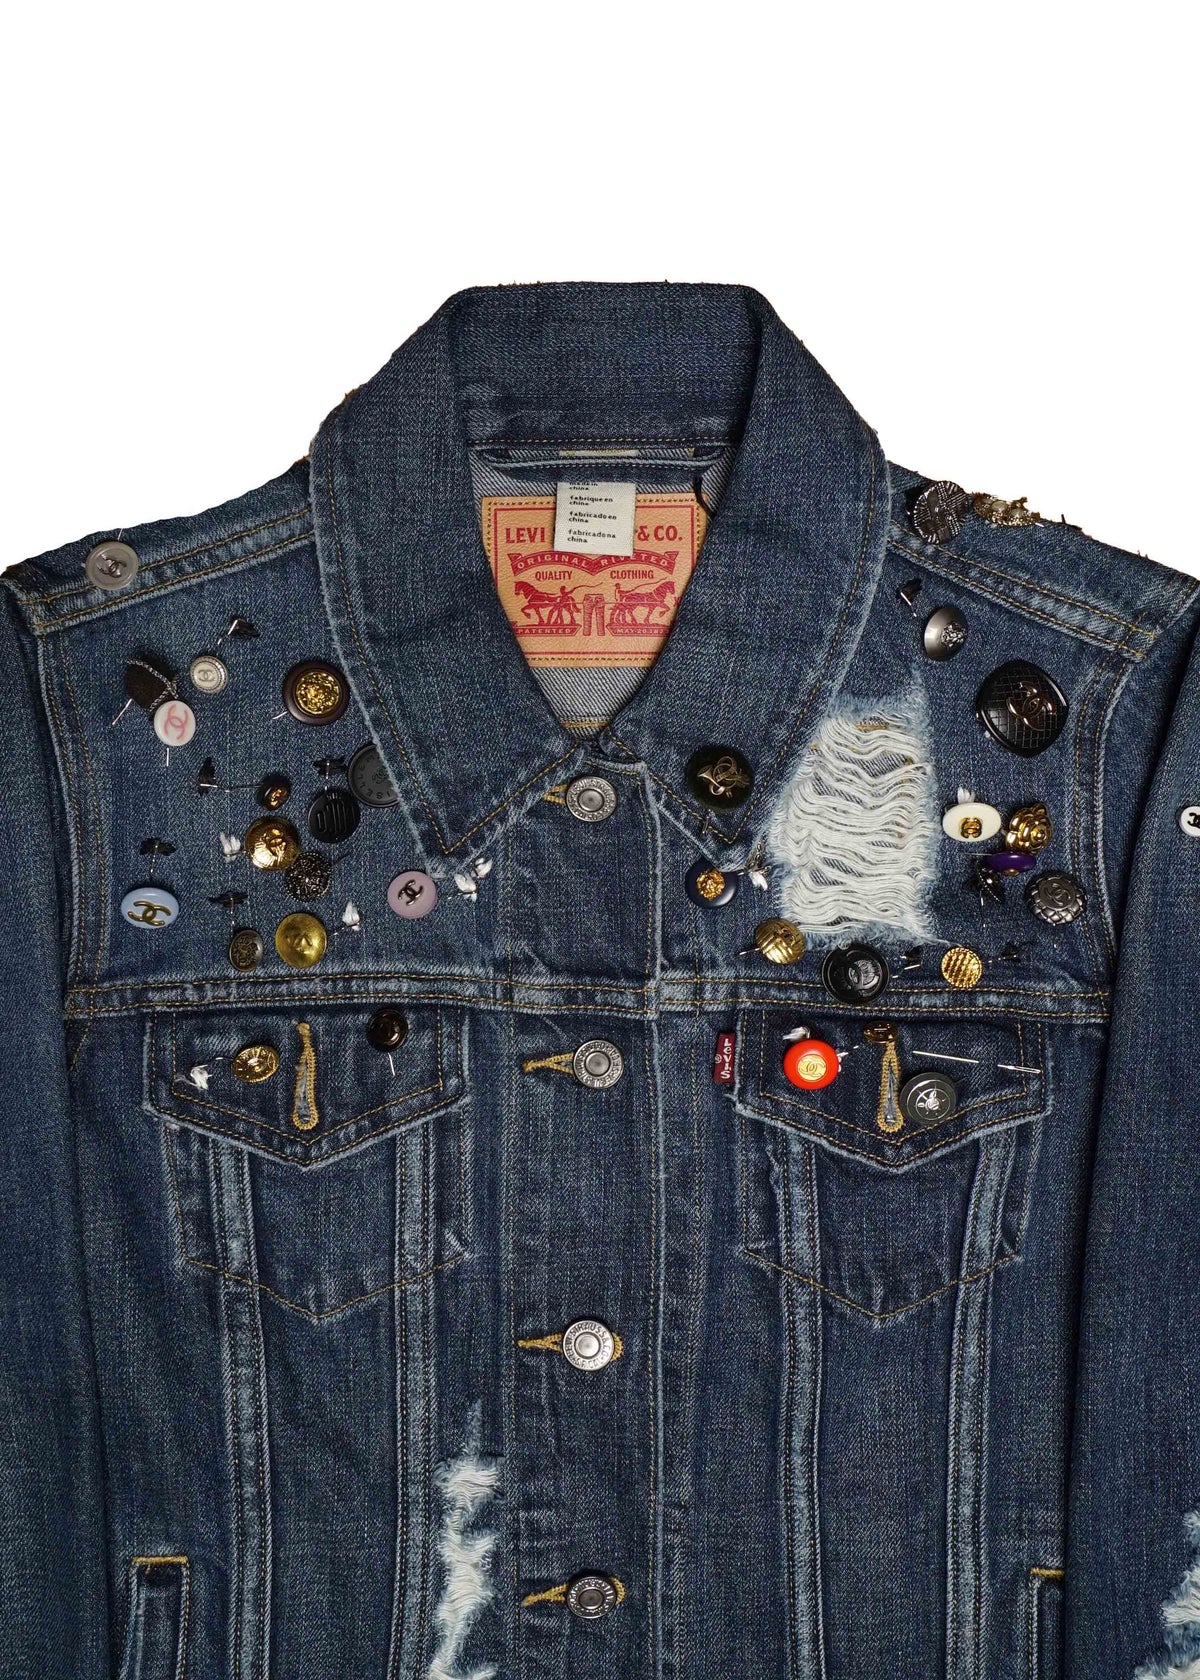 jean jacket with buttons